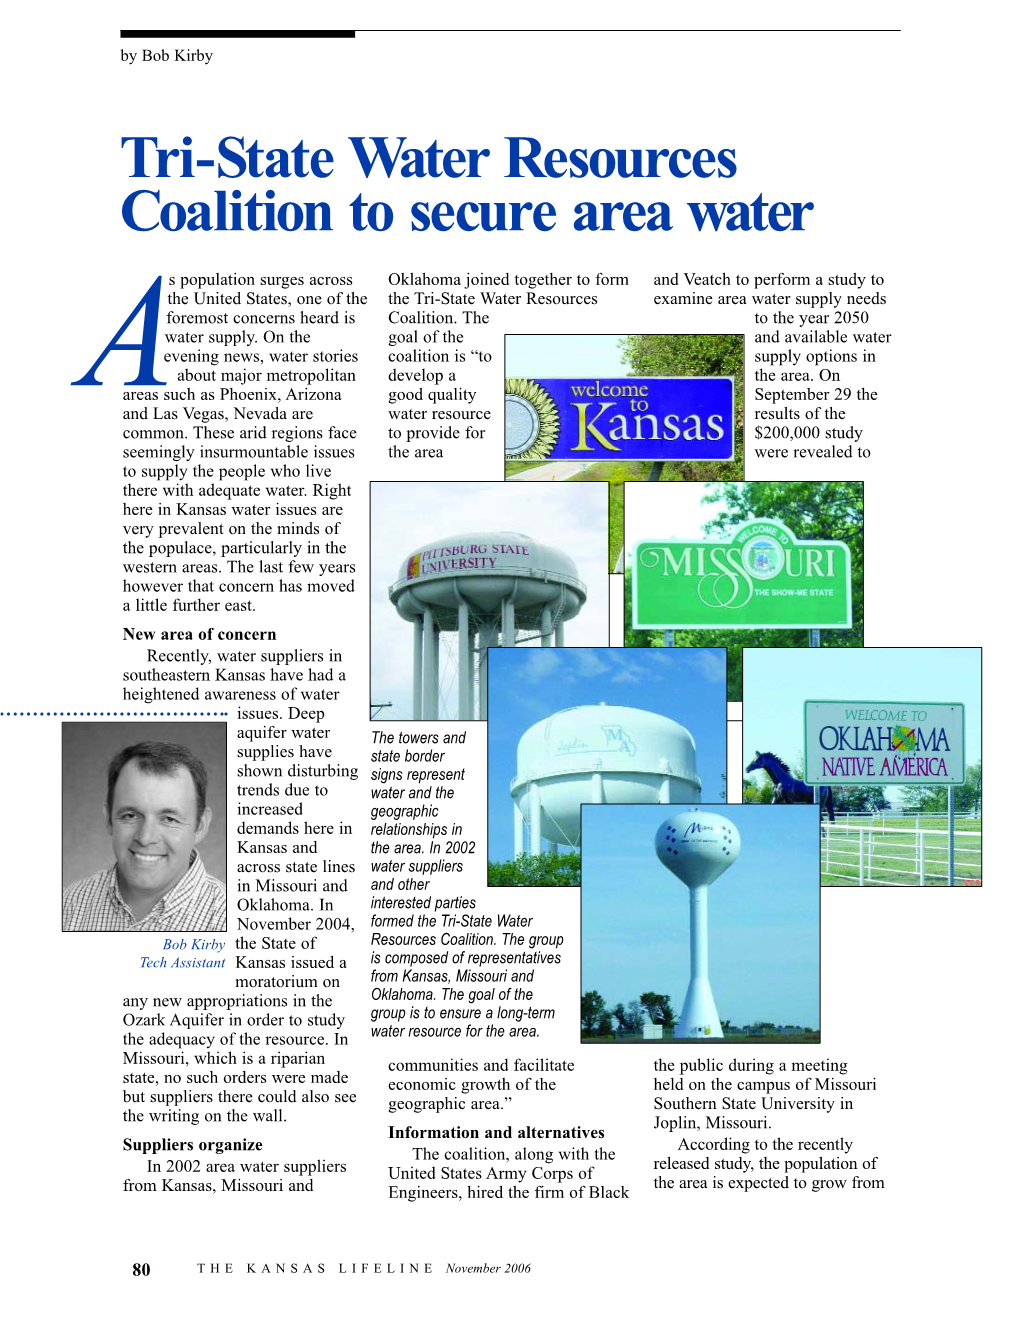 Tri-State Water Resources Coalition to Secure Area Water